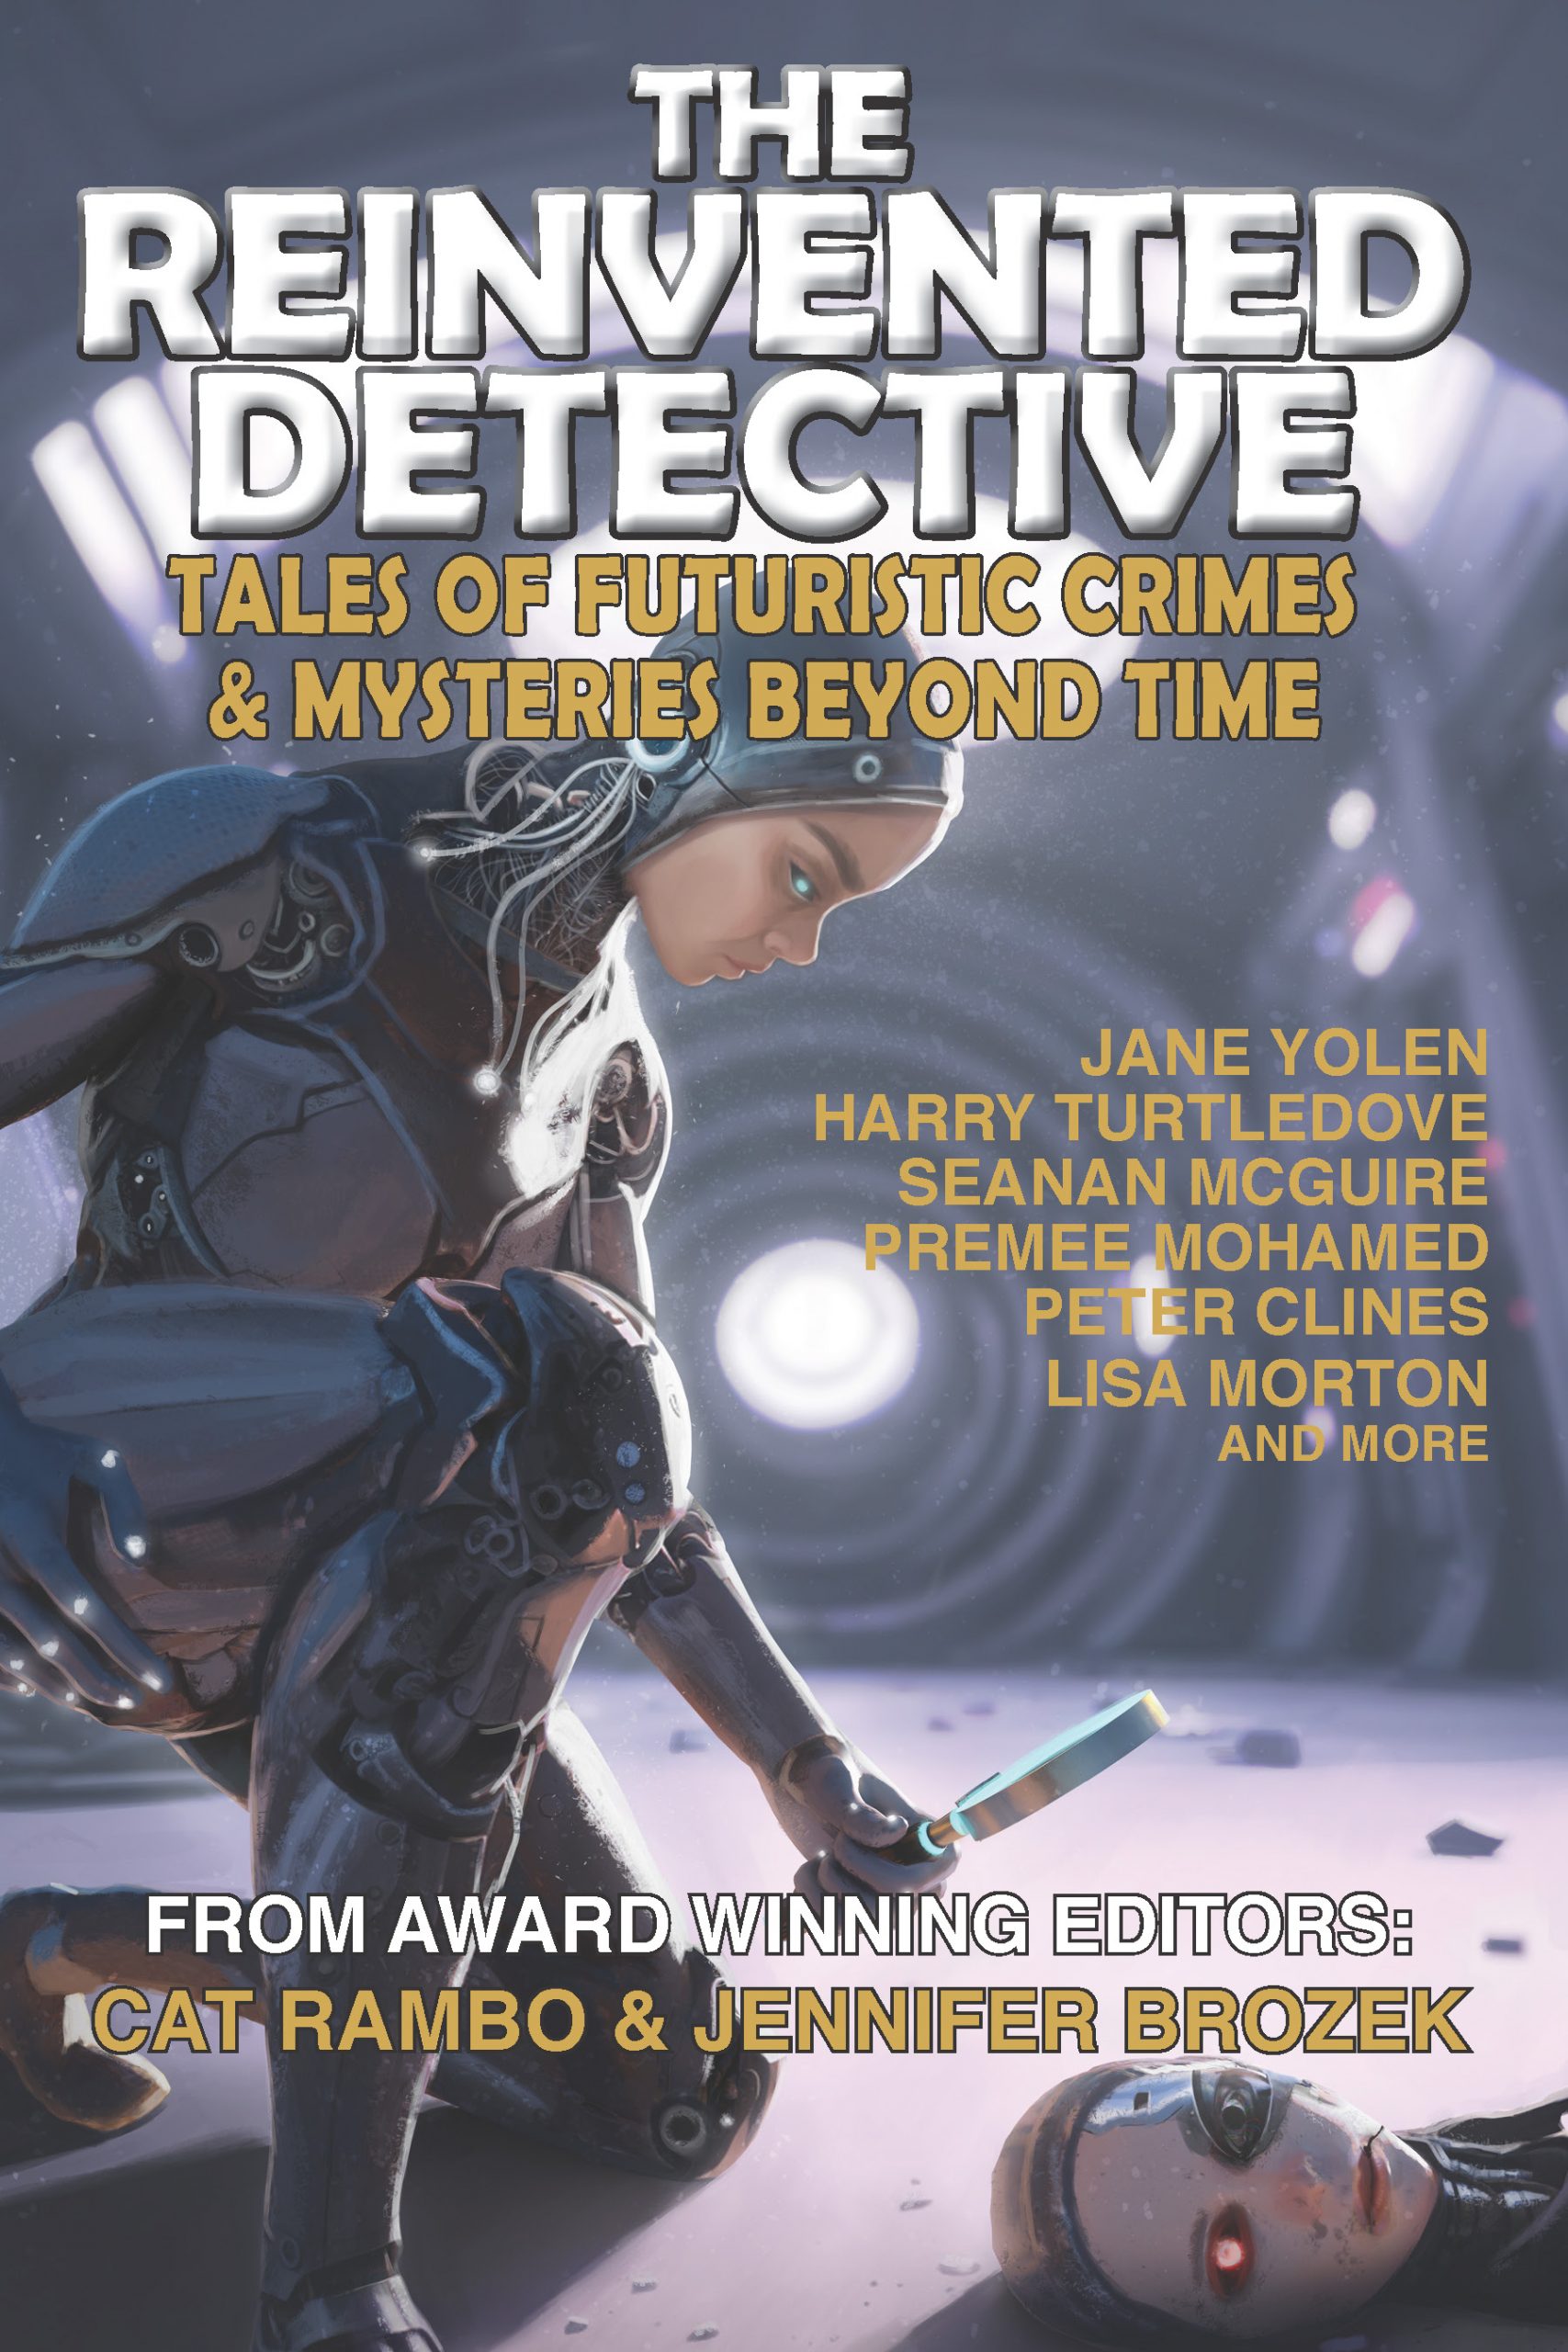 The Reinvented Detective: Tales of Futuristic Crimes & Mysteries Beyond Time
A cyborg detective holding a magnifying glass